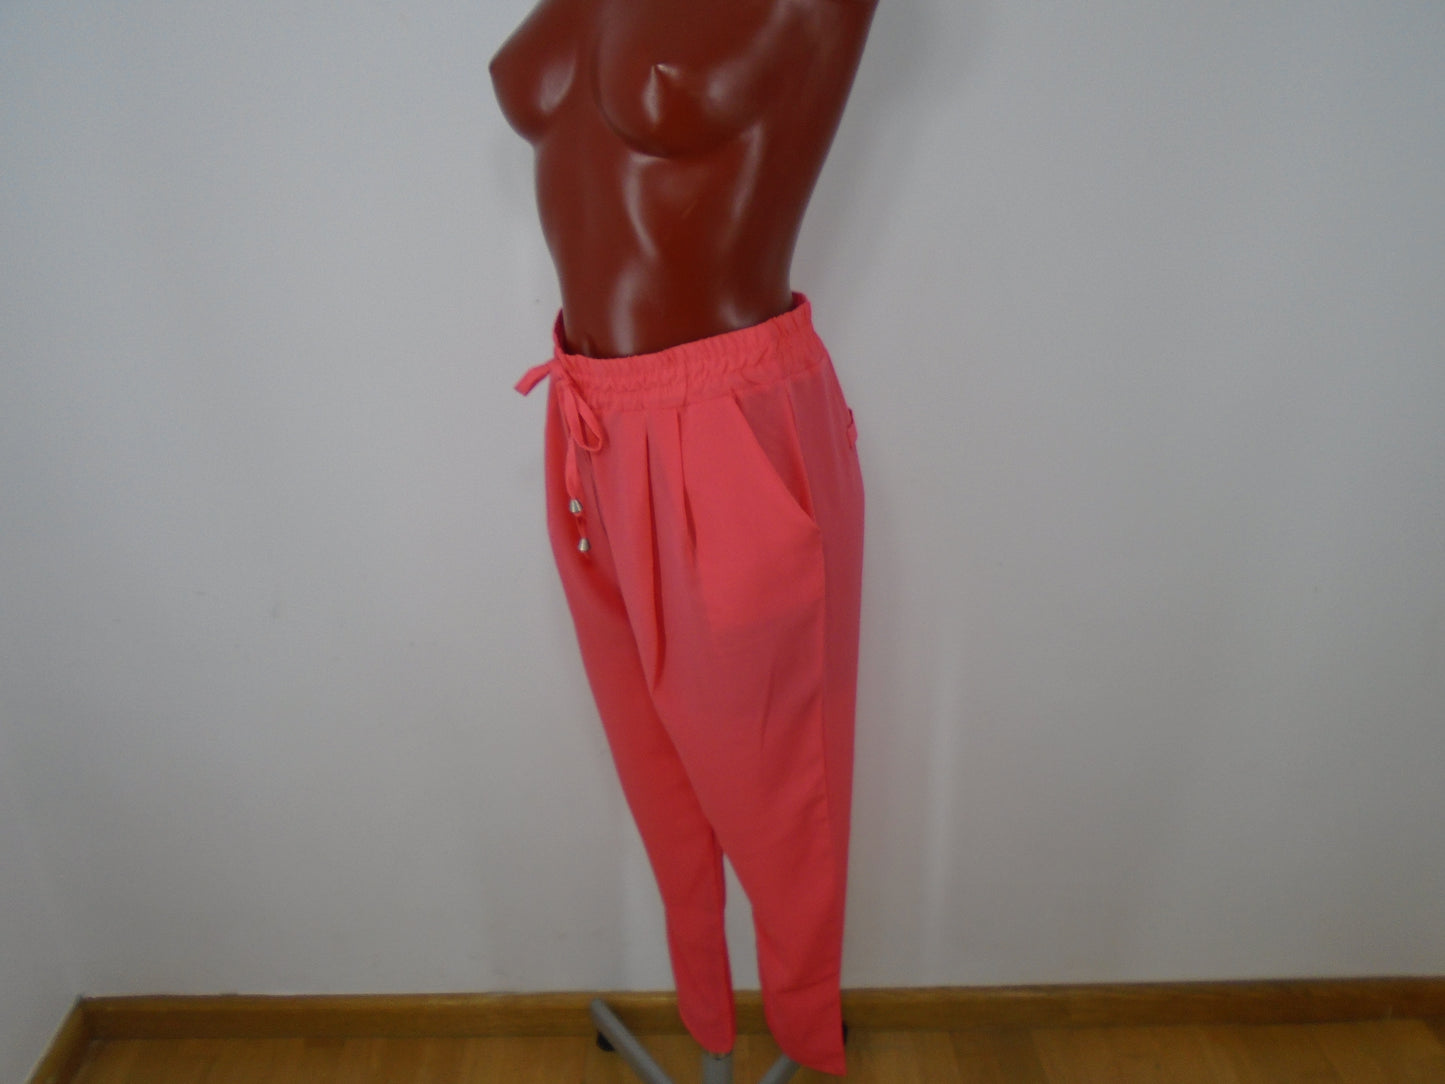 Women's Pants Unknown Brand. Coral. M. New without tags